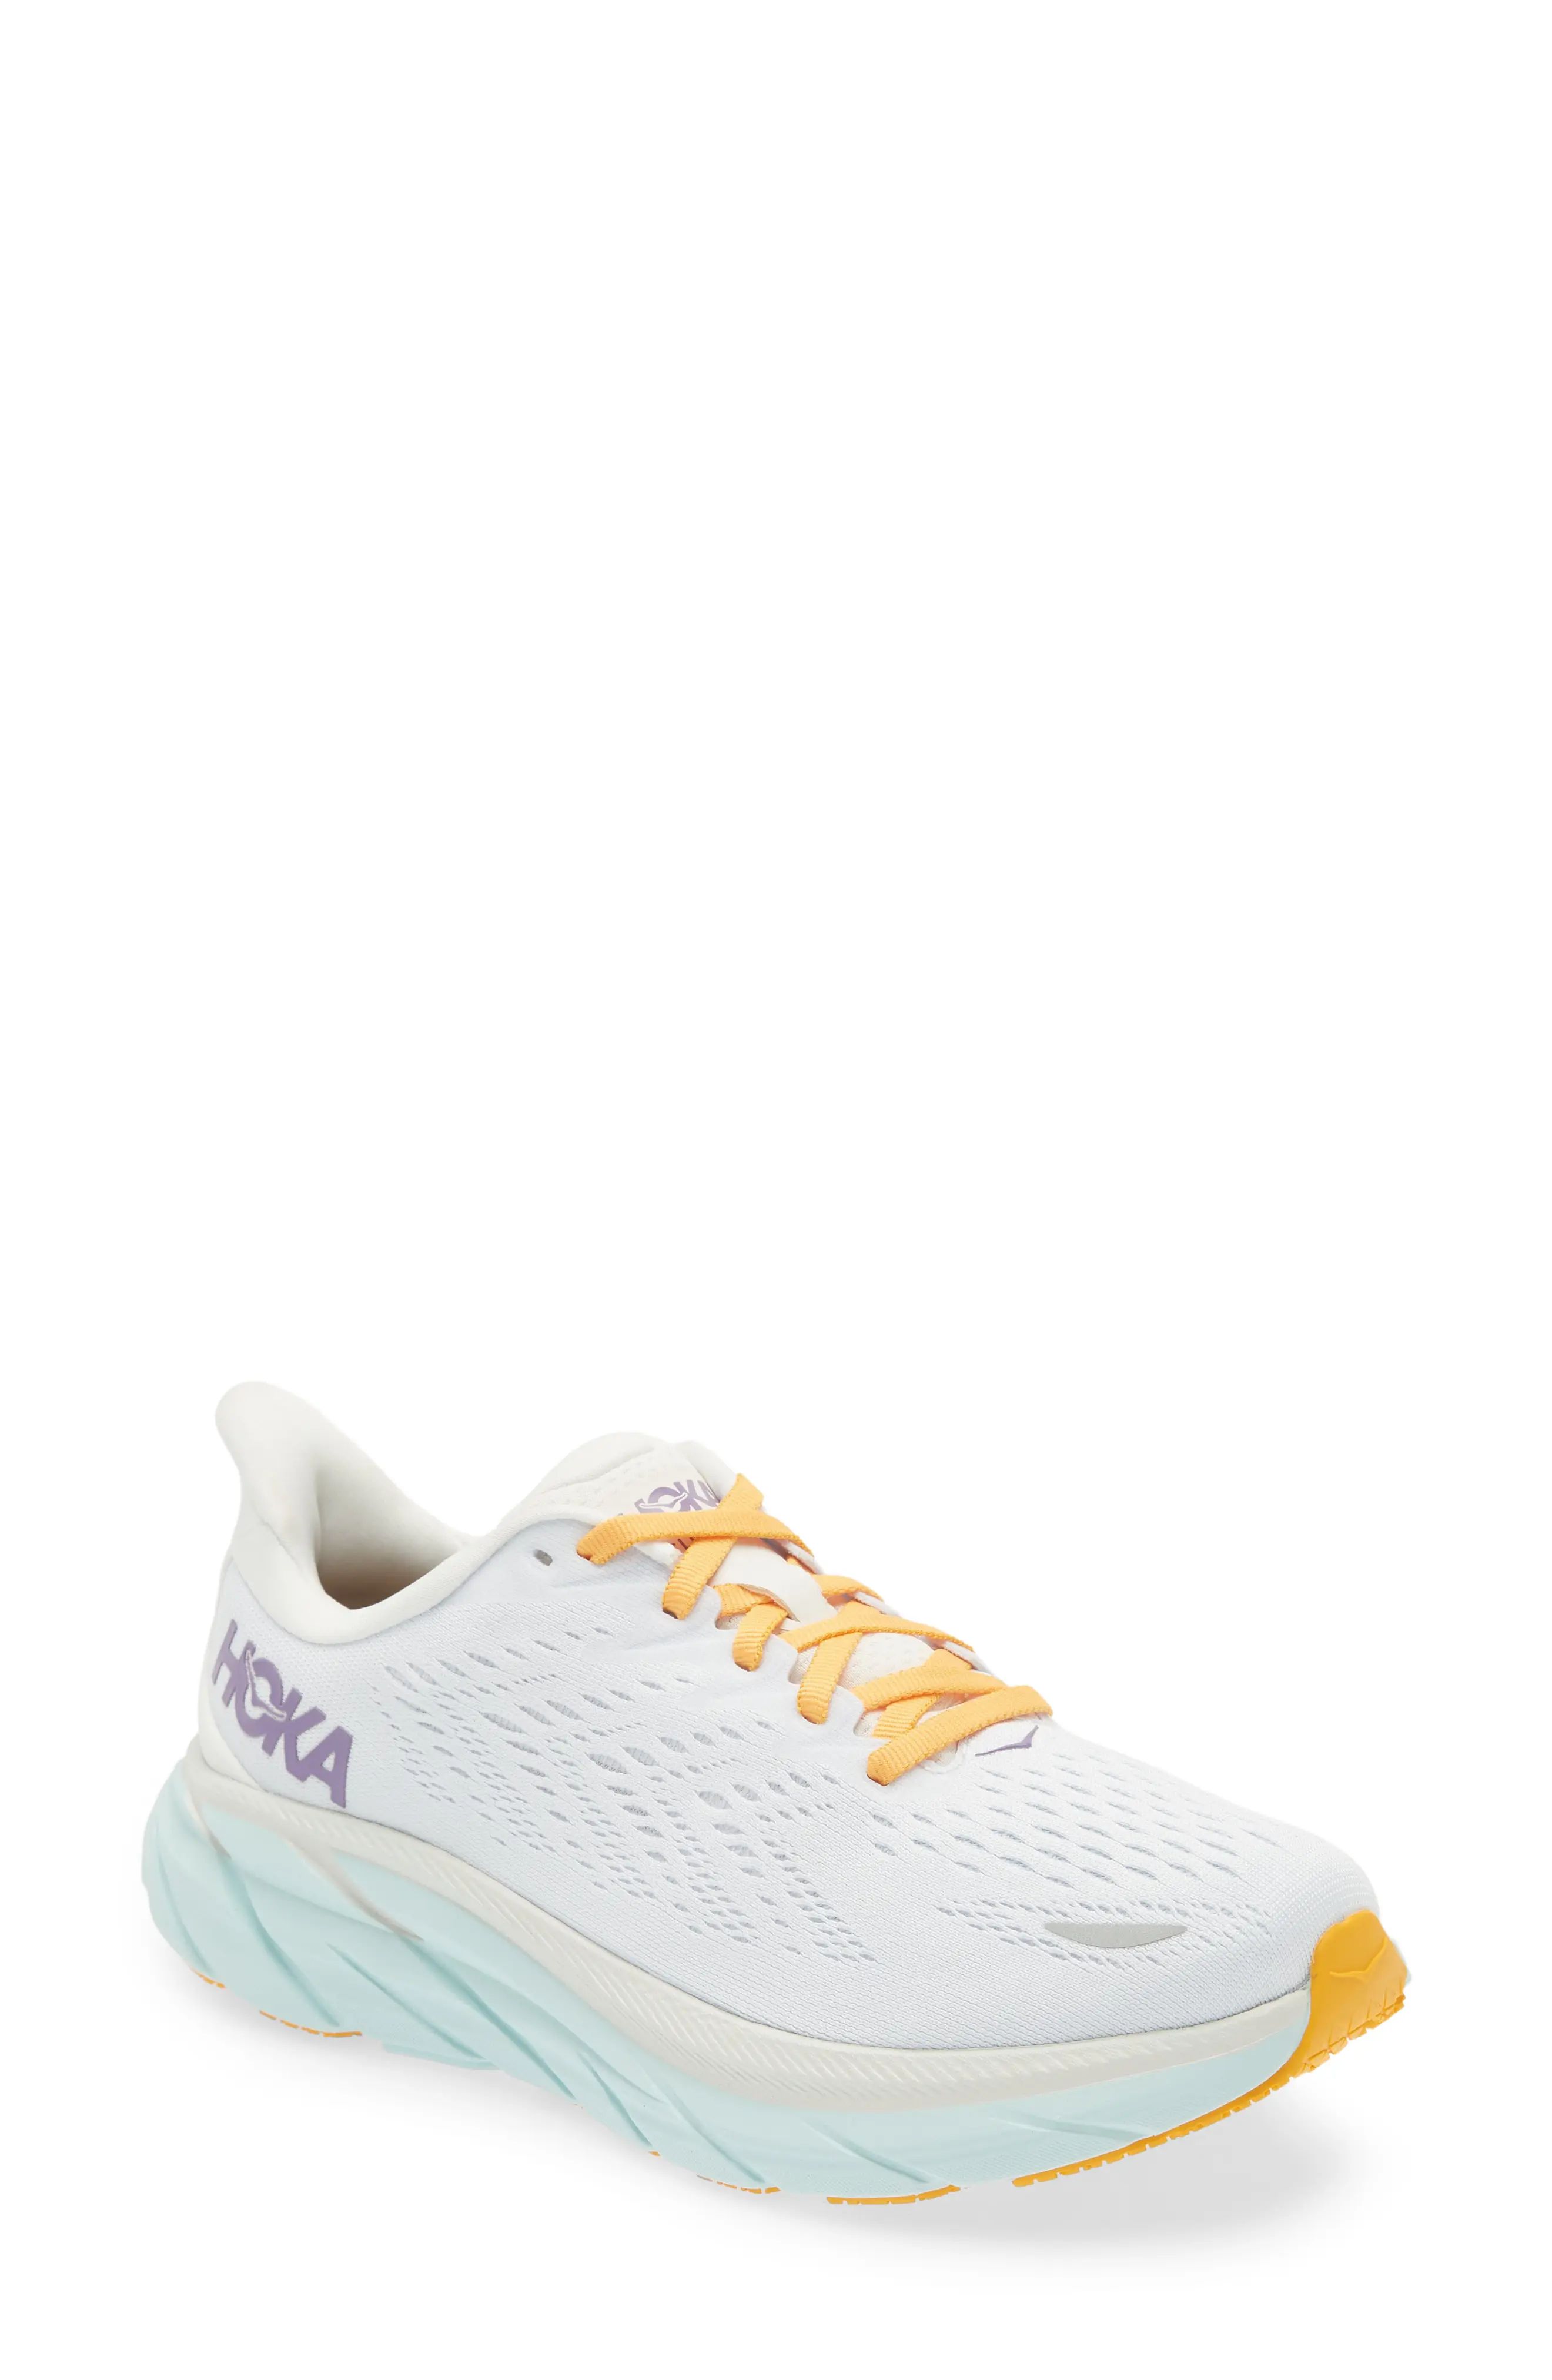 HOKA ONE ONE Clifton 8 Running Shoe in Blanc De Blanc /White at Nordstrom, Size 5.5 | Nordstrom